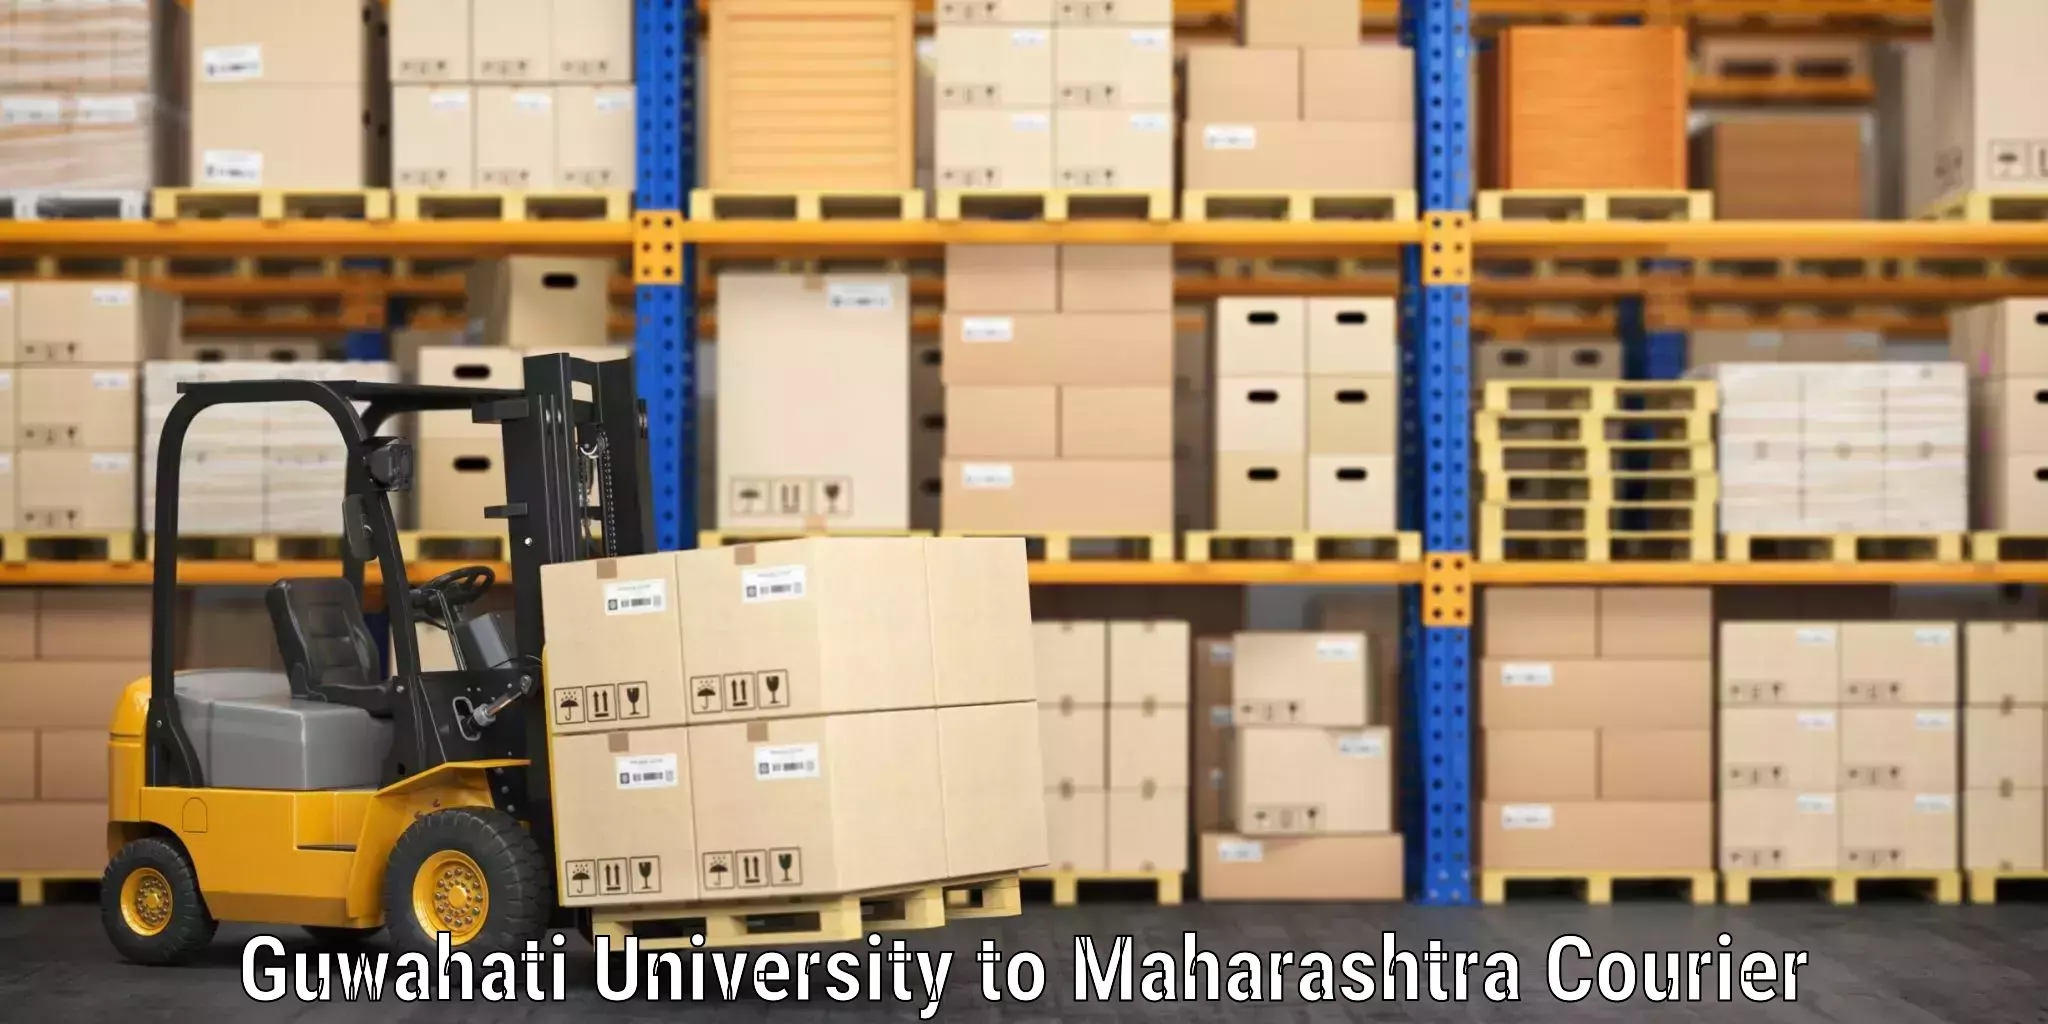 Luggage transport consulting Guwahati University to Dhule